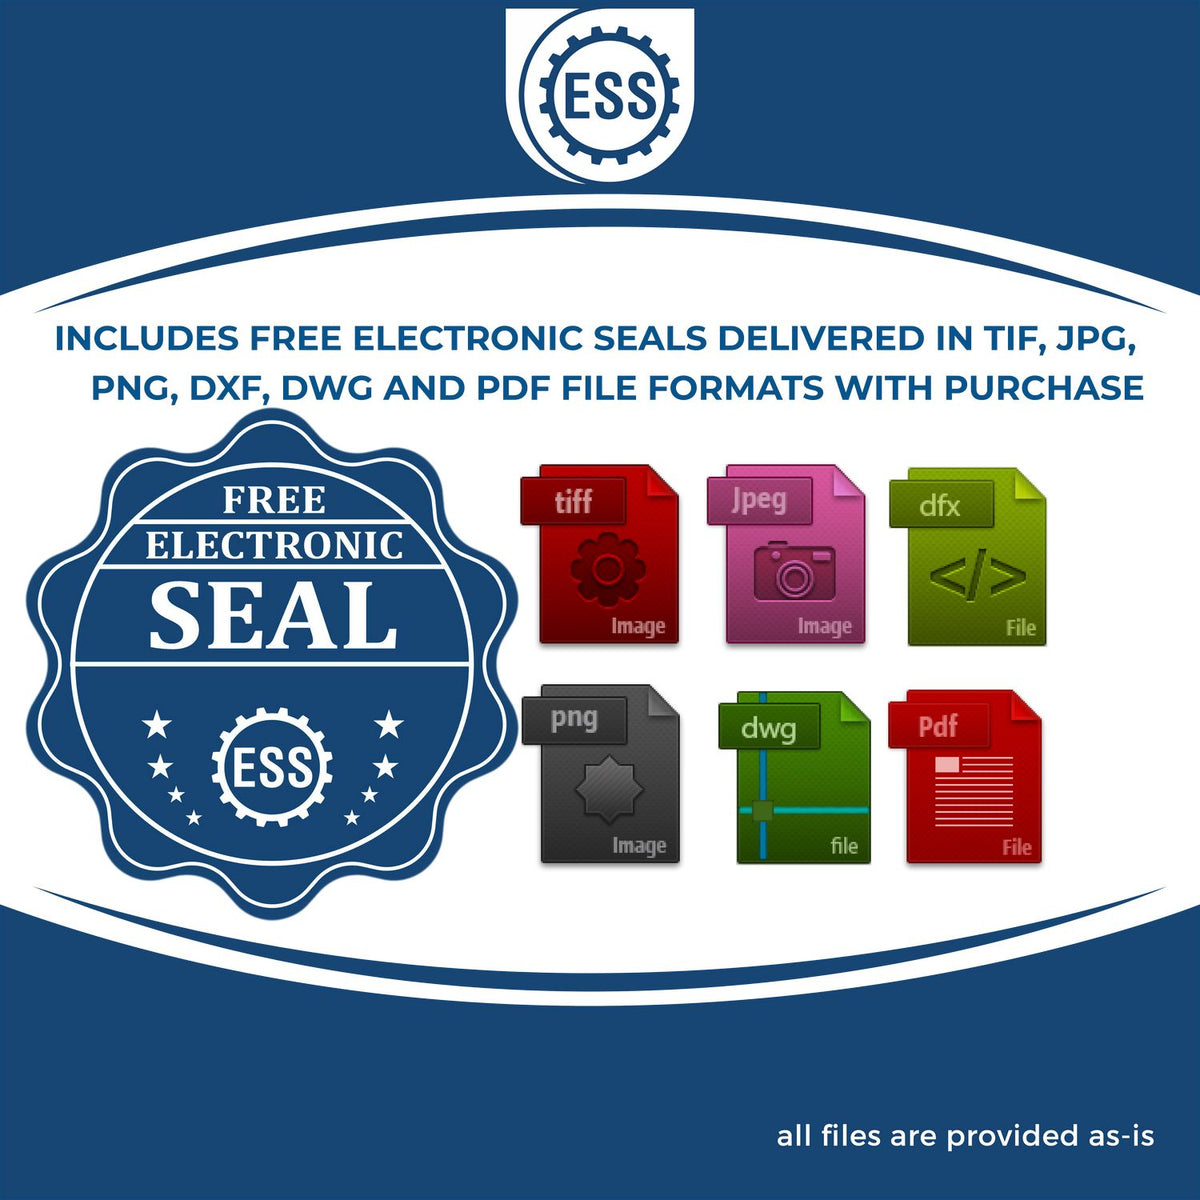 An infographic for the free electronic seal for the Self-Inking Connecticut Geologist Stamp illustrating the different file type icons such as DXF, DWG, TIF, JPG and PNG.